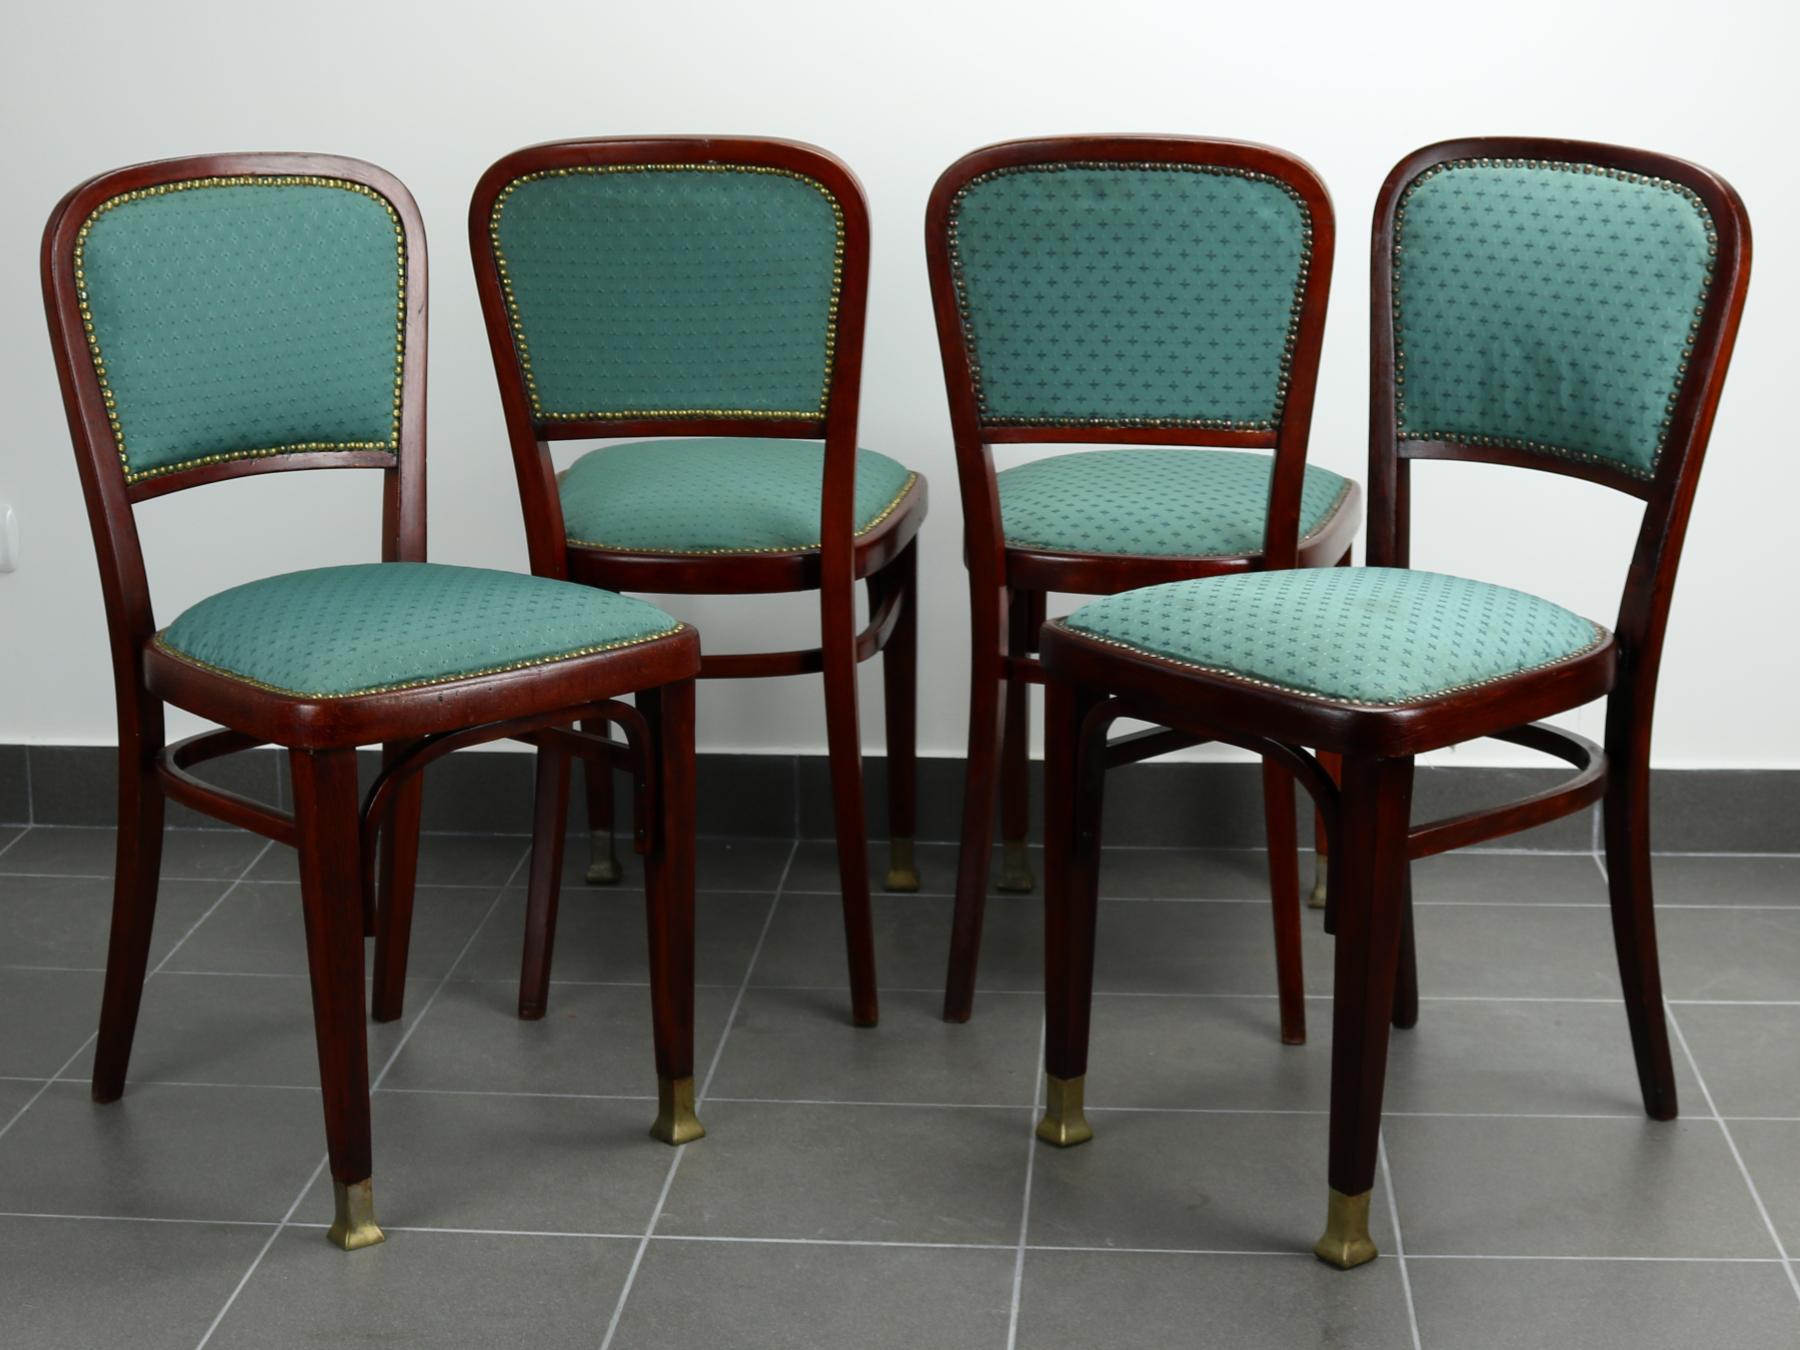 Brass Set of four chairs by Marcel Kammerer for Thonet, circa 1910